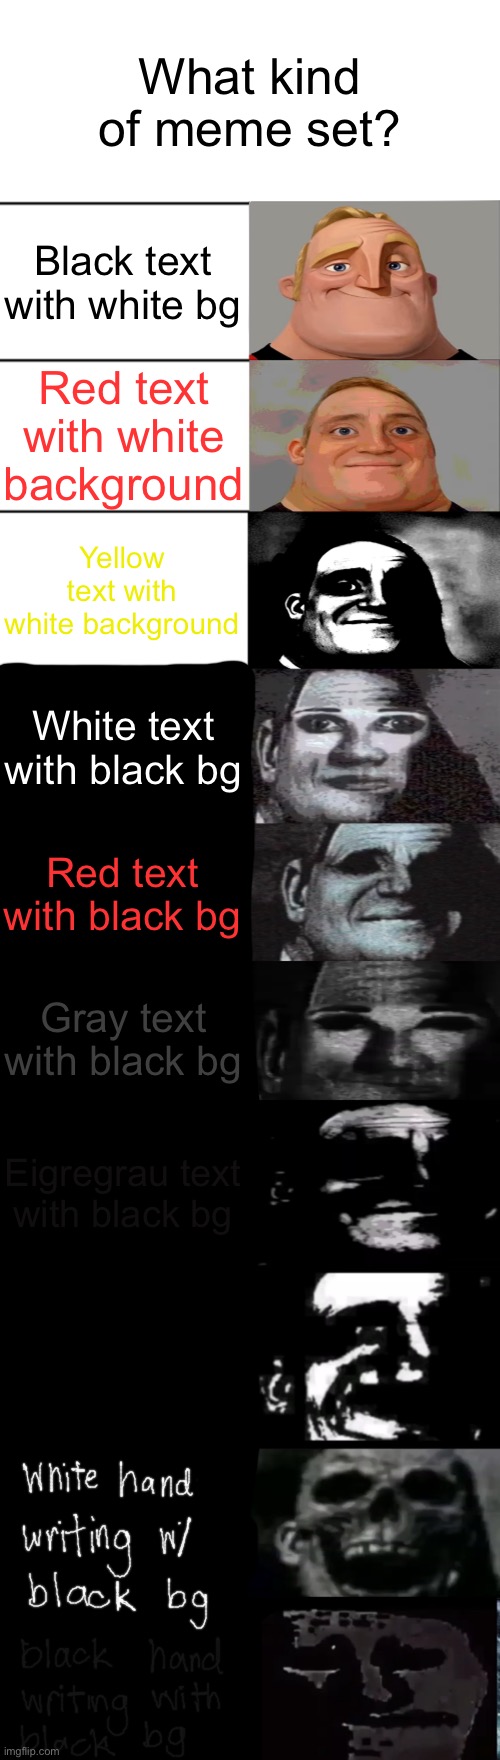 Meme sets lol | What kind of meme set? Black text with white bg; Red text with white background; Yellow text with white background; White text with black bg; Red text with black bg; Gray text with black bg; Eigregrau text with black bg; BLACK TEXT WITH BLACK BACKGROUND | image tagged in mr incredible becoming uncanny,memes | made w/ Imgflip meme maker